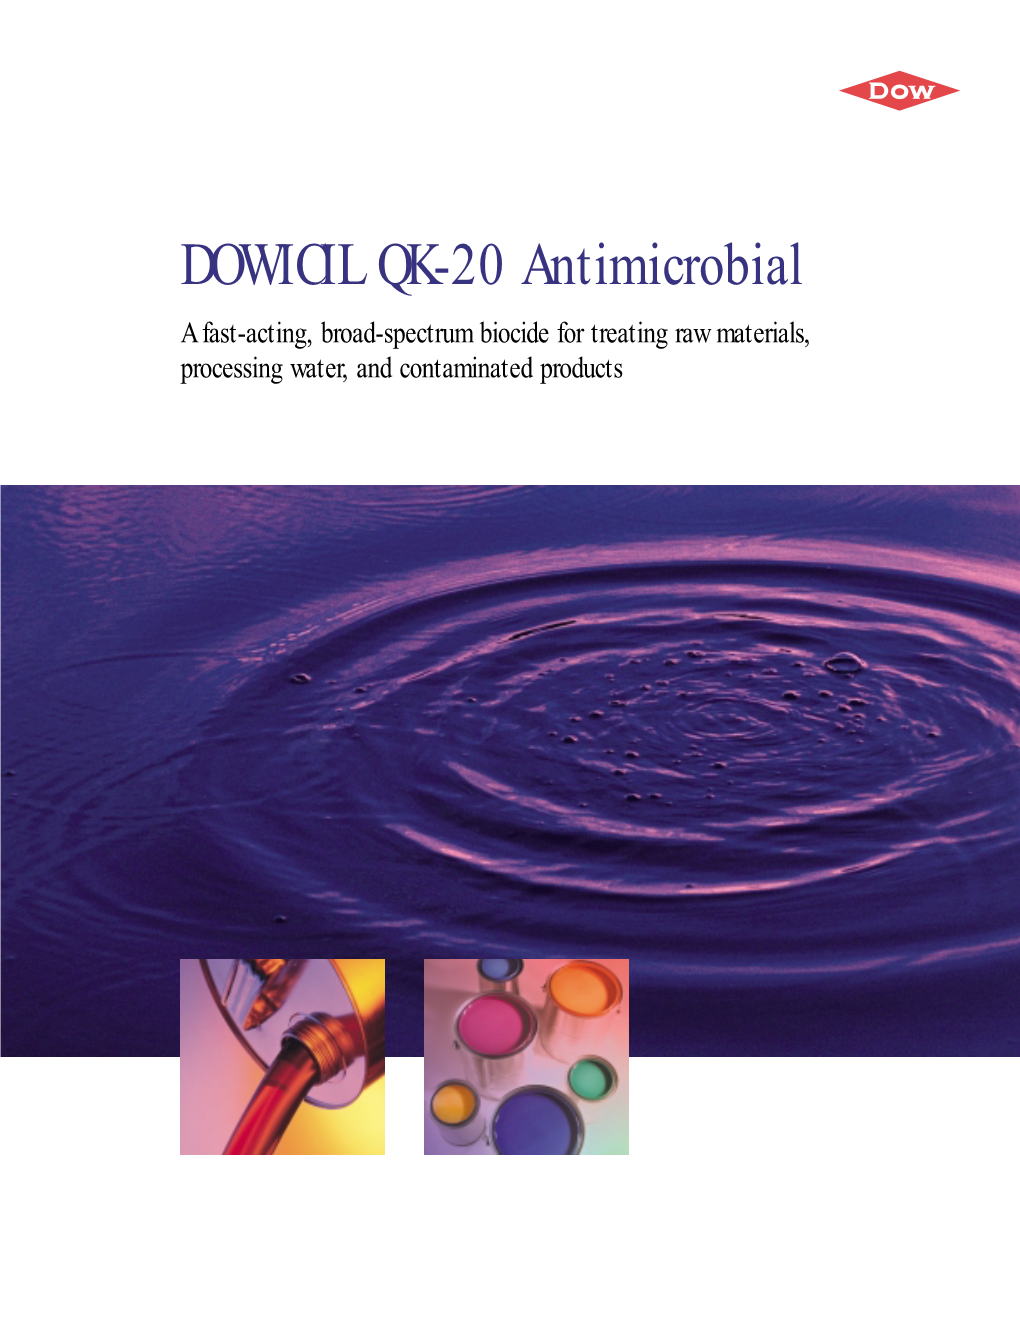 DOWICIL QK-20 Antimicrobial a Fast-Acting, Broad-Spectrum Biocide for Treating Raw Materials, Processing Water, and Contaminated Products Contents